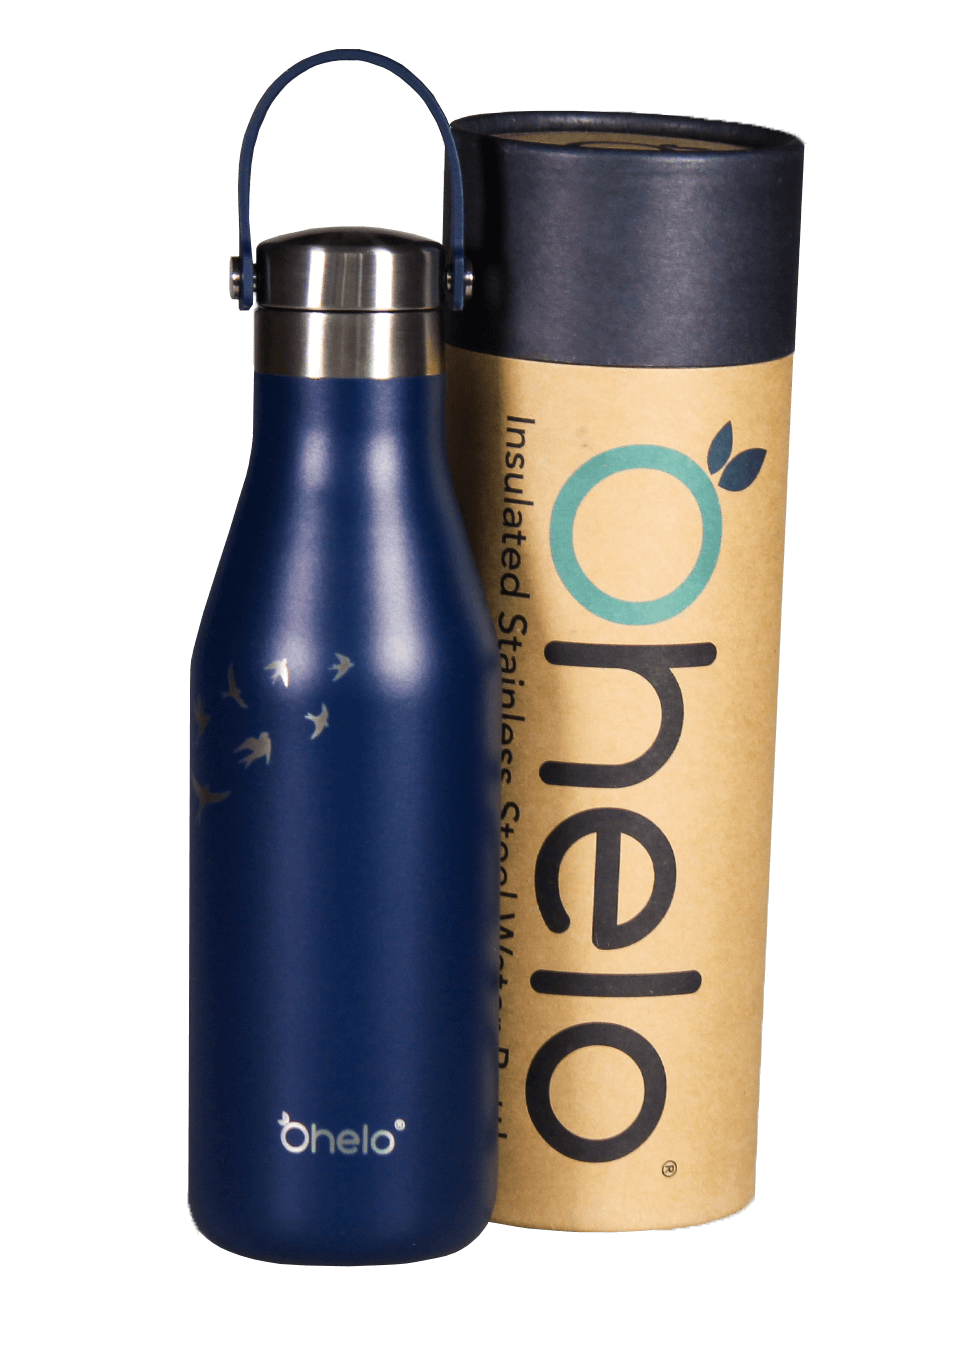 Ohelo Oxford Blue Swallows insulated reusable bottle with recycled packaging